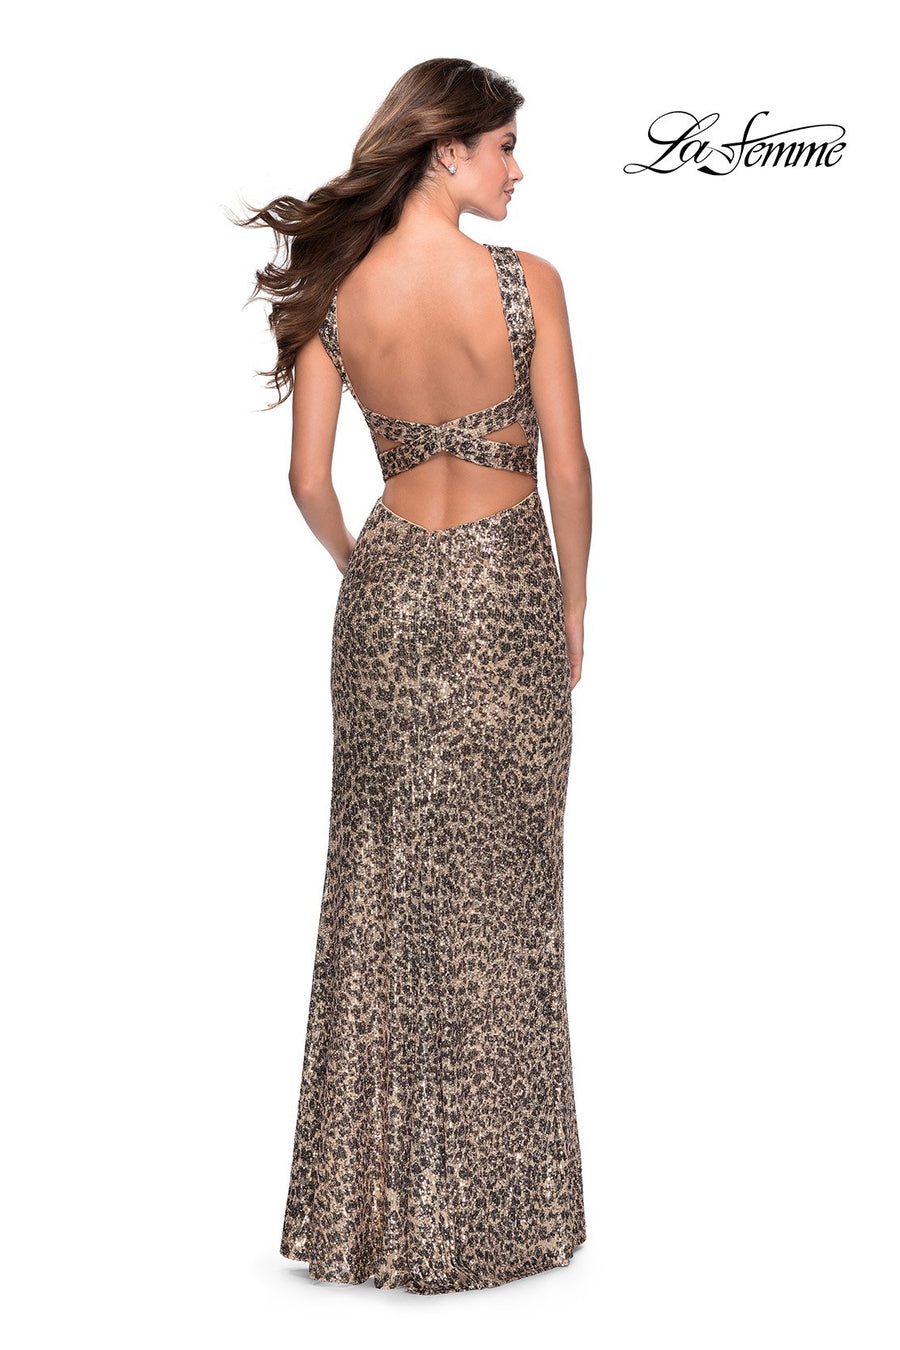 La Femme 28672 prom dress images.  La Femme 28672 is available in these colors: Leopard.